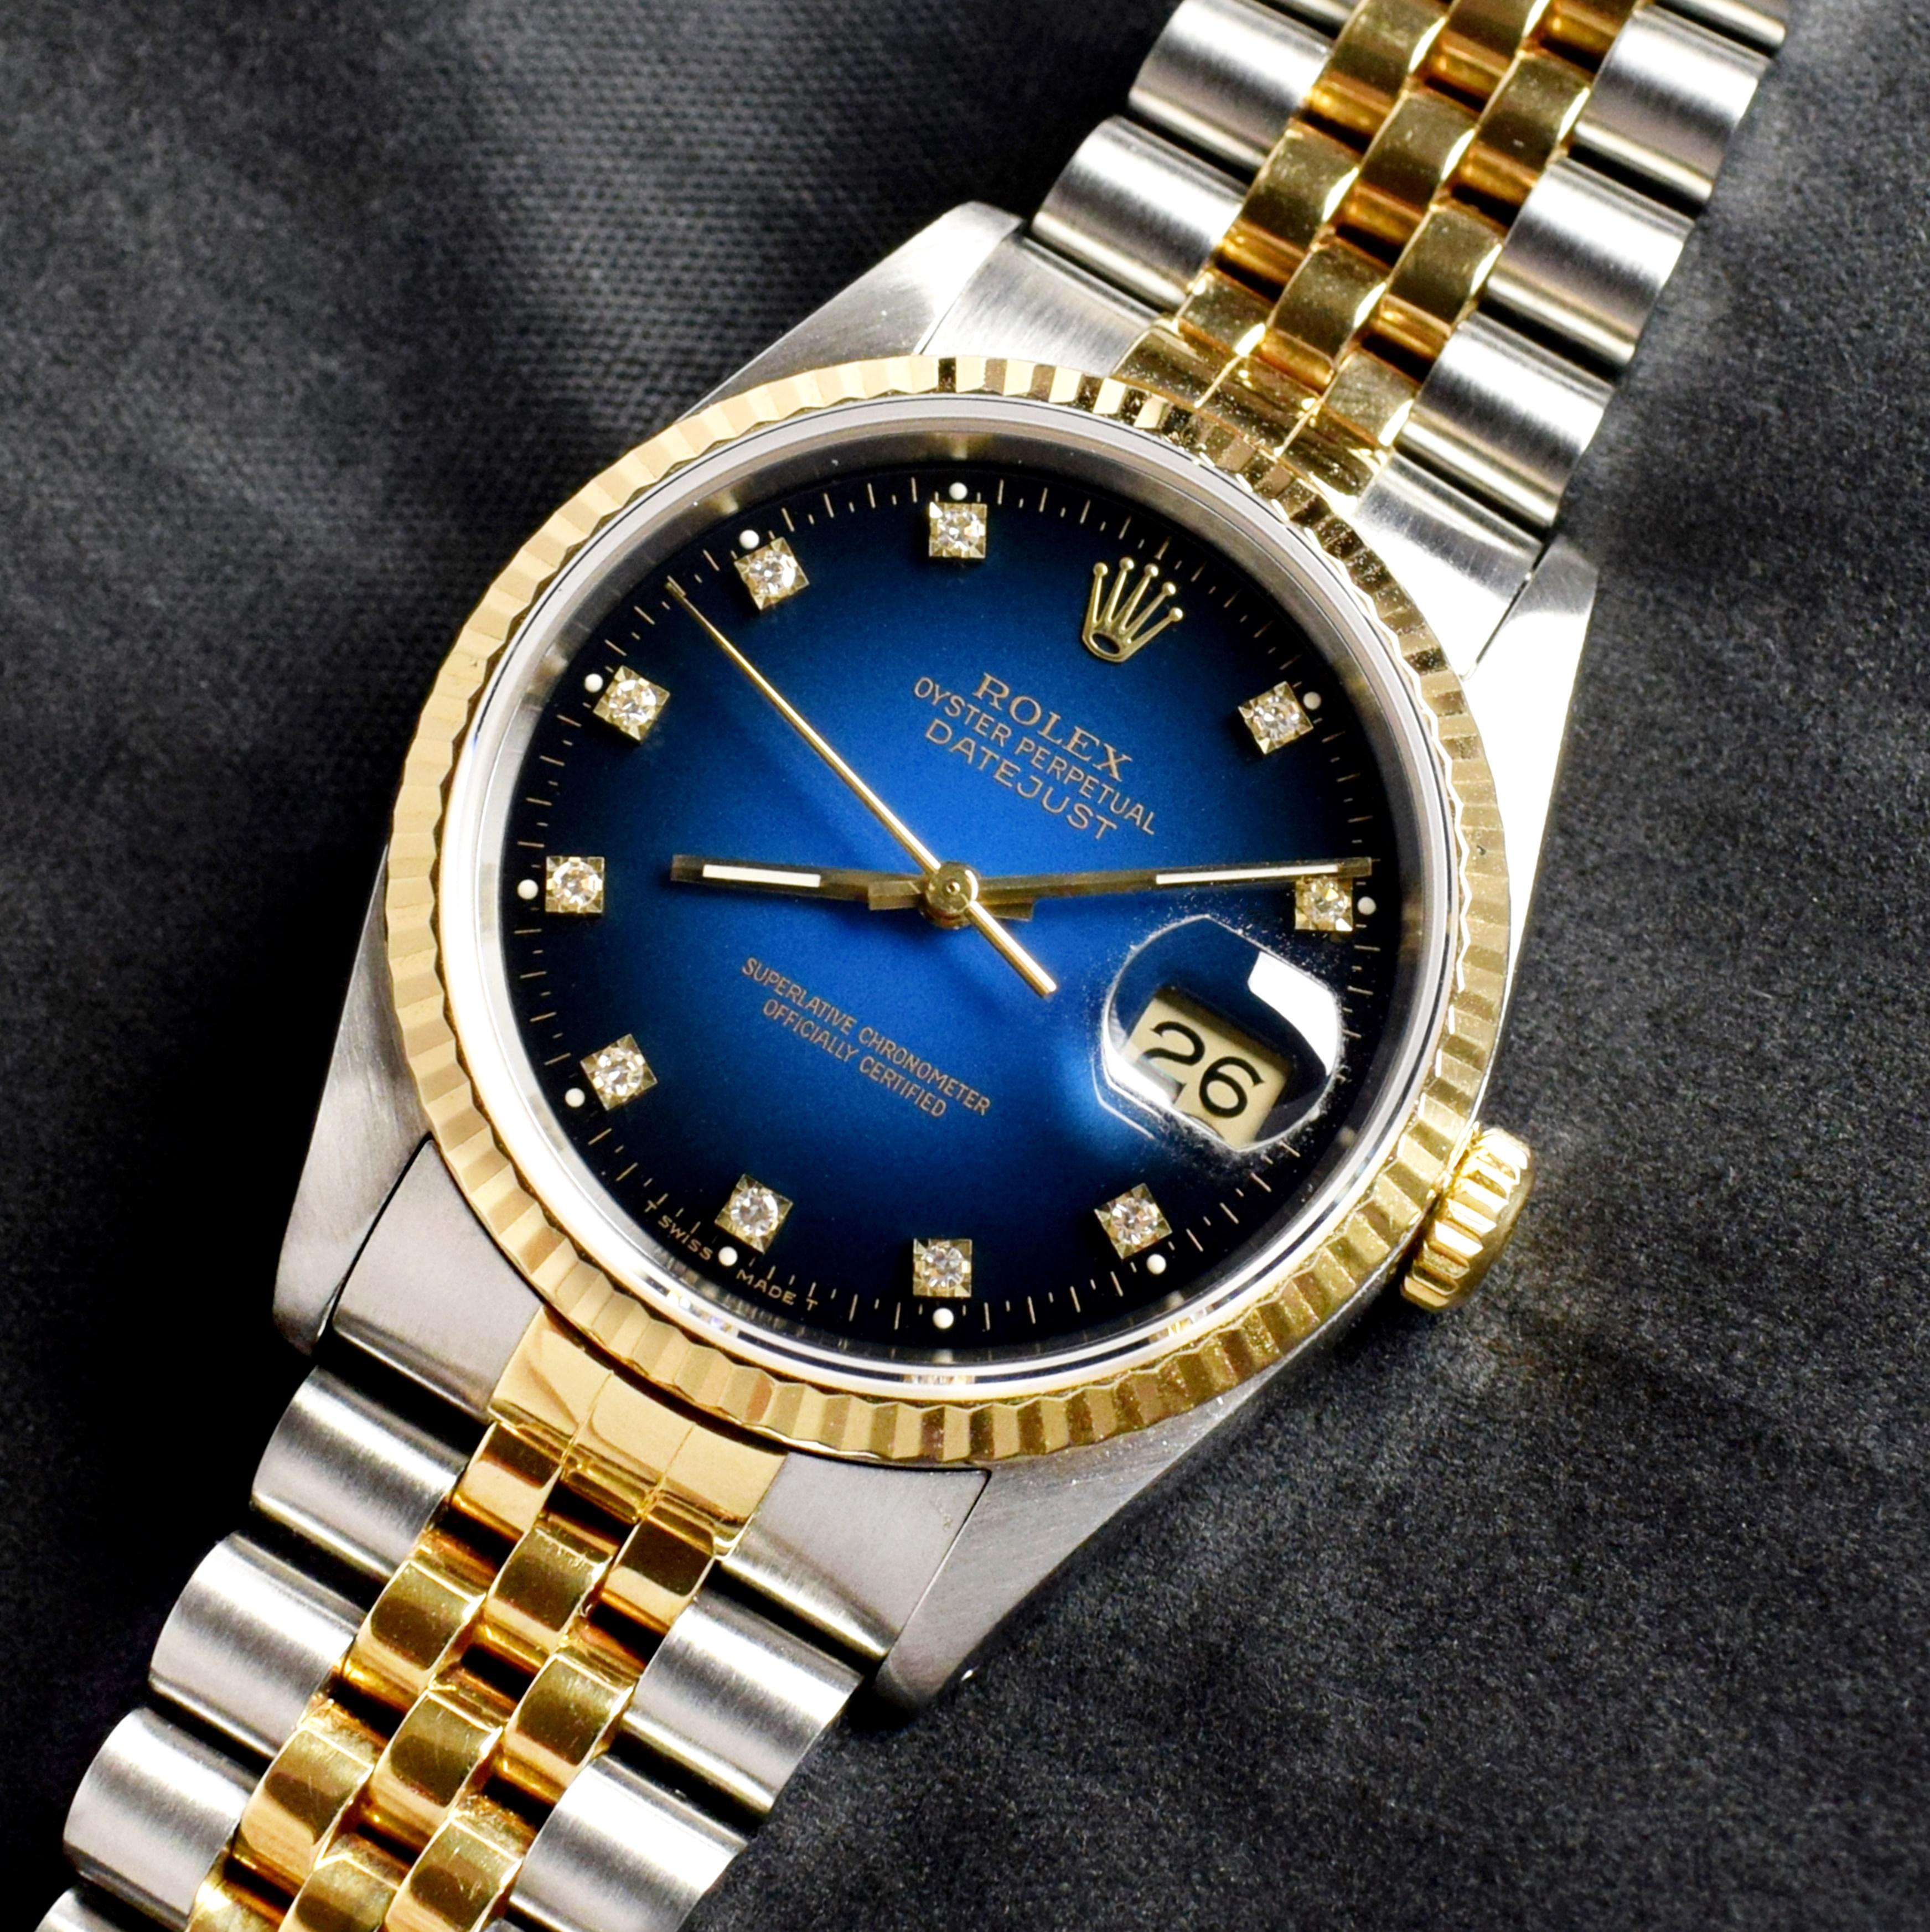 Brand: Vintage Rolex
Model: 16233
Year: 1990
Serial number: E3xxxxx
Reference: C03708
Case: 36mm without crown; Show sign of wear with slight polish from previous; inner case back stamped 16200
Dial: Excellent Condition vignette ombre blue dial w/